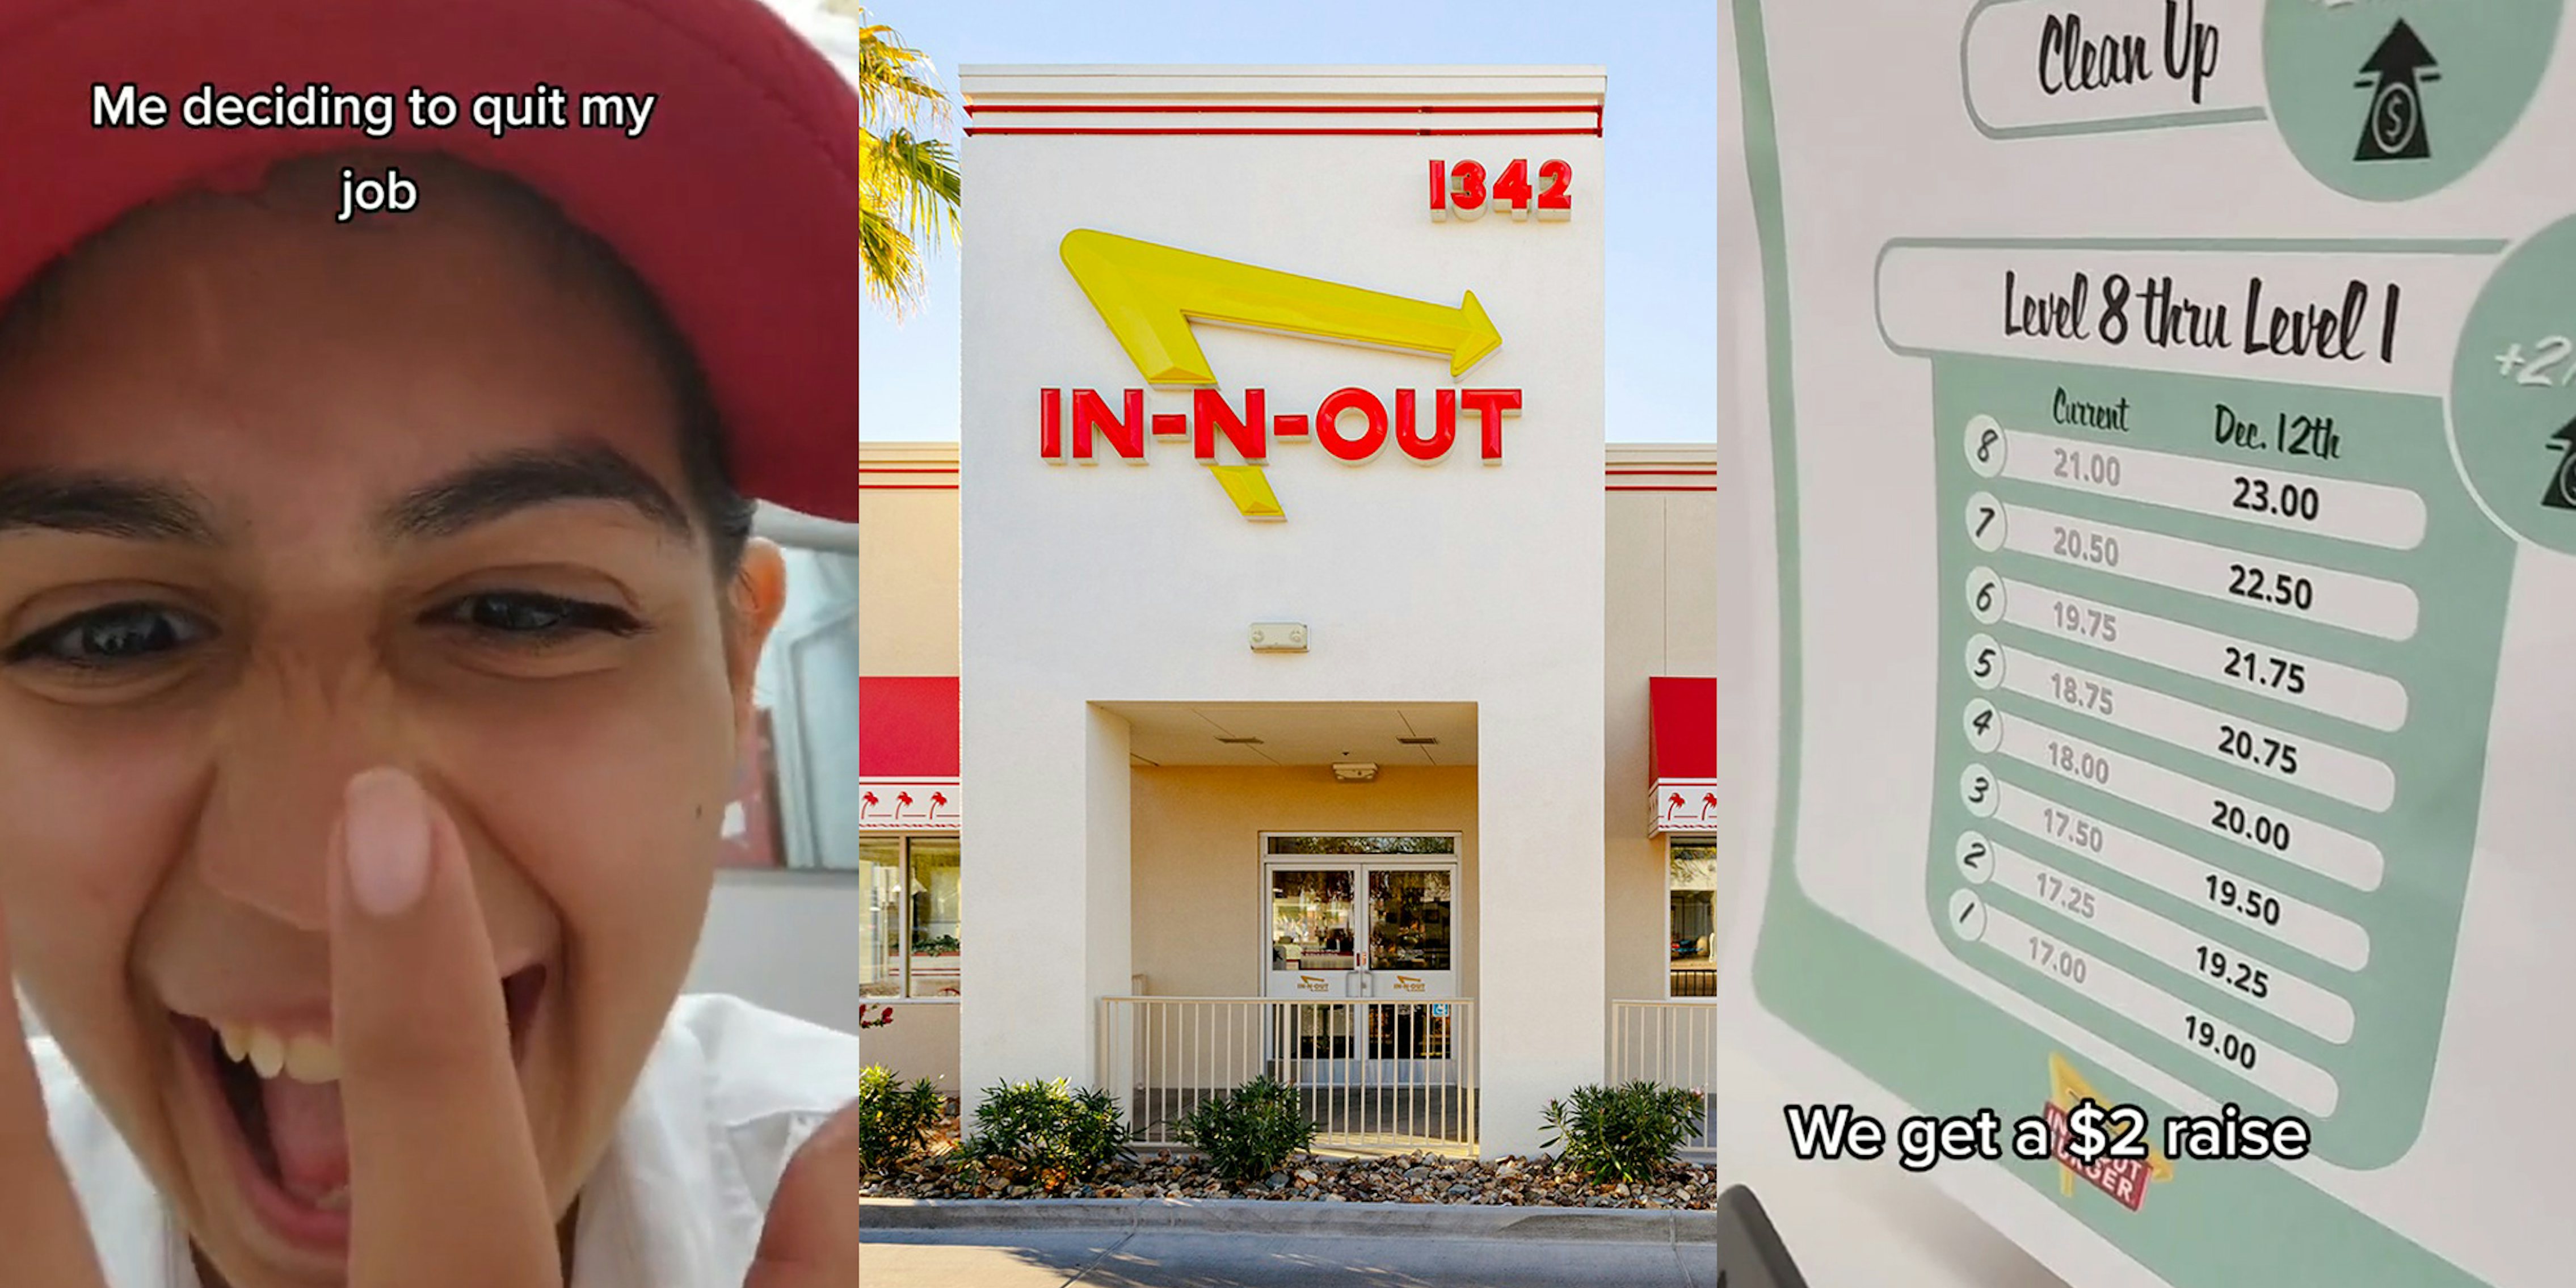 In-N-Out worker caption 'Me deciding to quit my job' (l) In-N-Out building with sign (c) In-N-Out wall chart of pay for each level caption 'We get a $2 raise' (r)